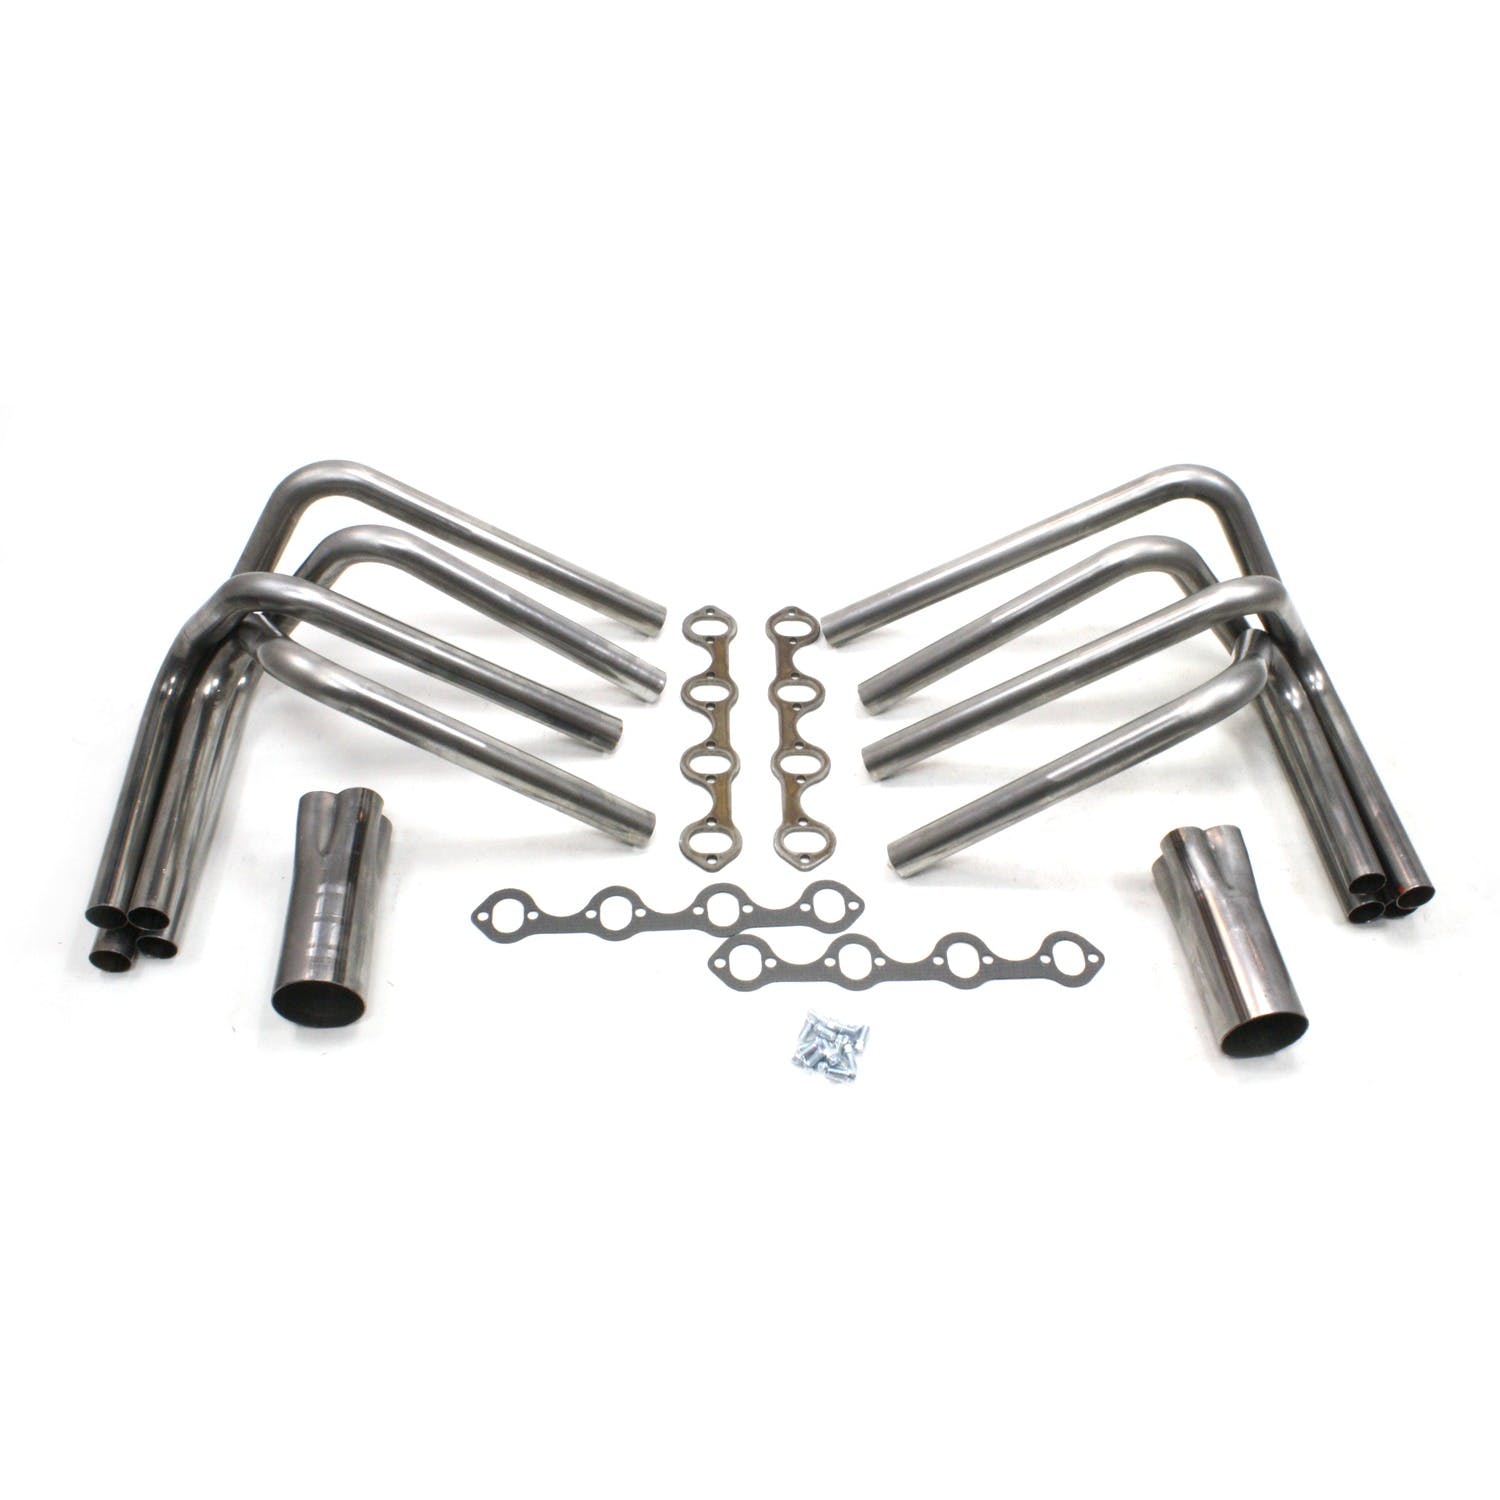 Patriot Exhaust H8410 Sprint Car Style SBF Weld Up Raw Steel